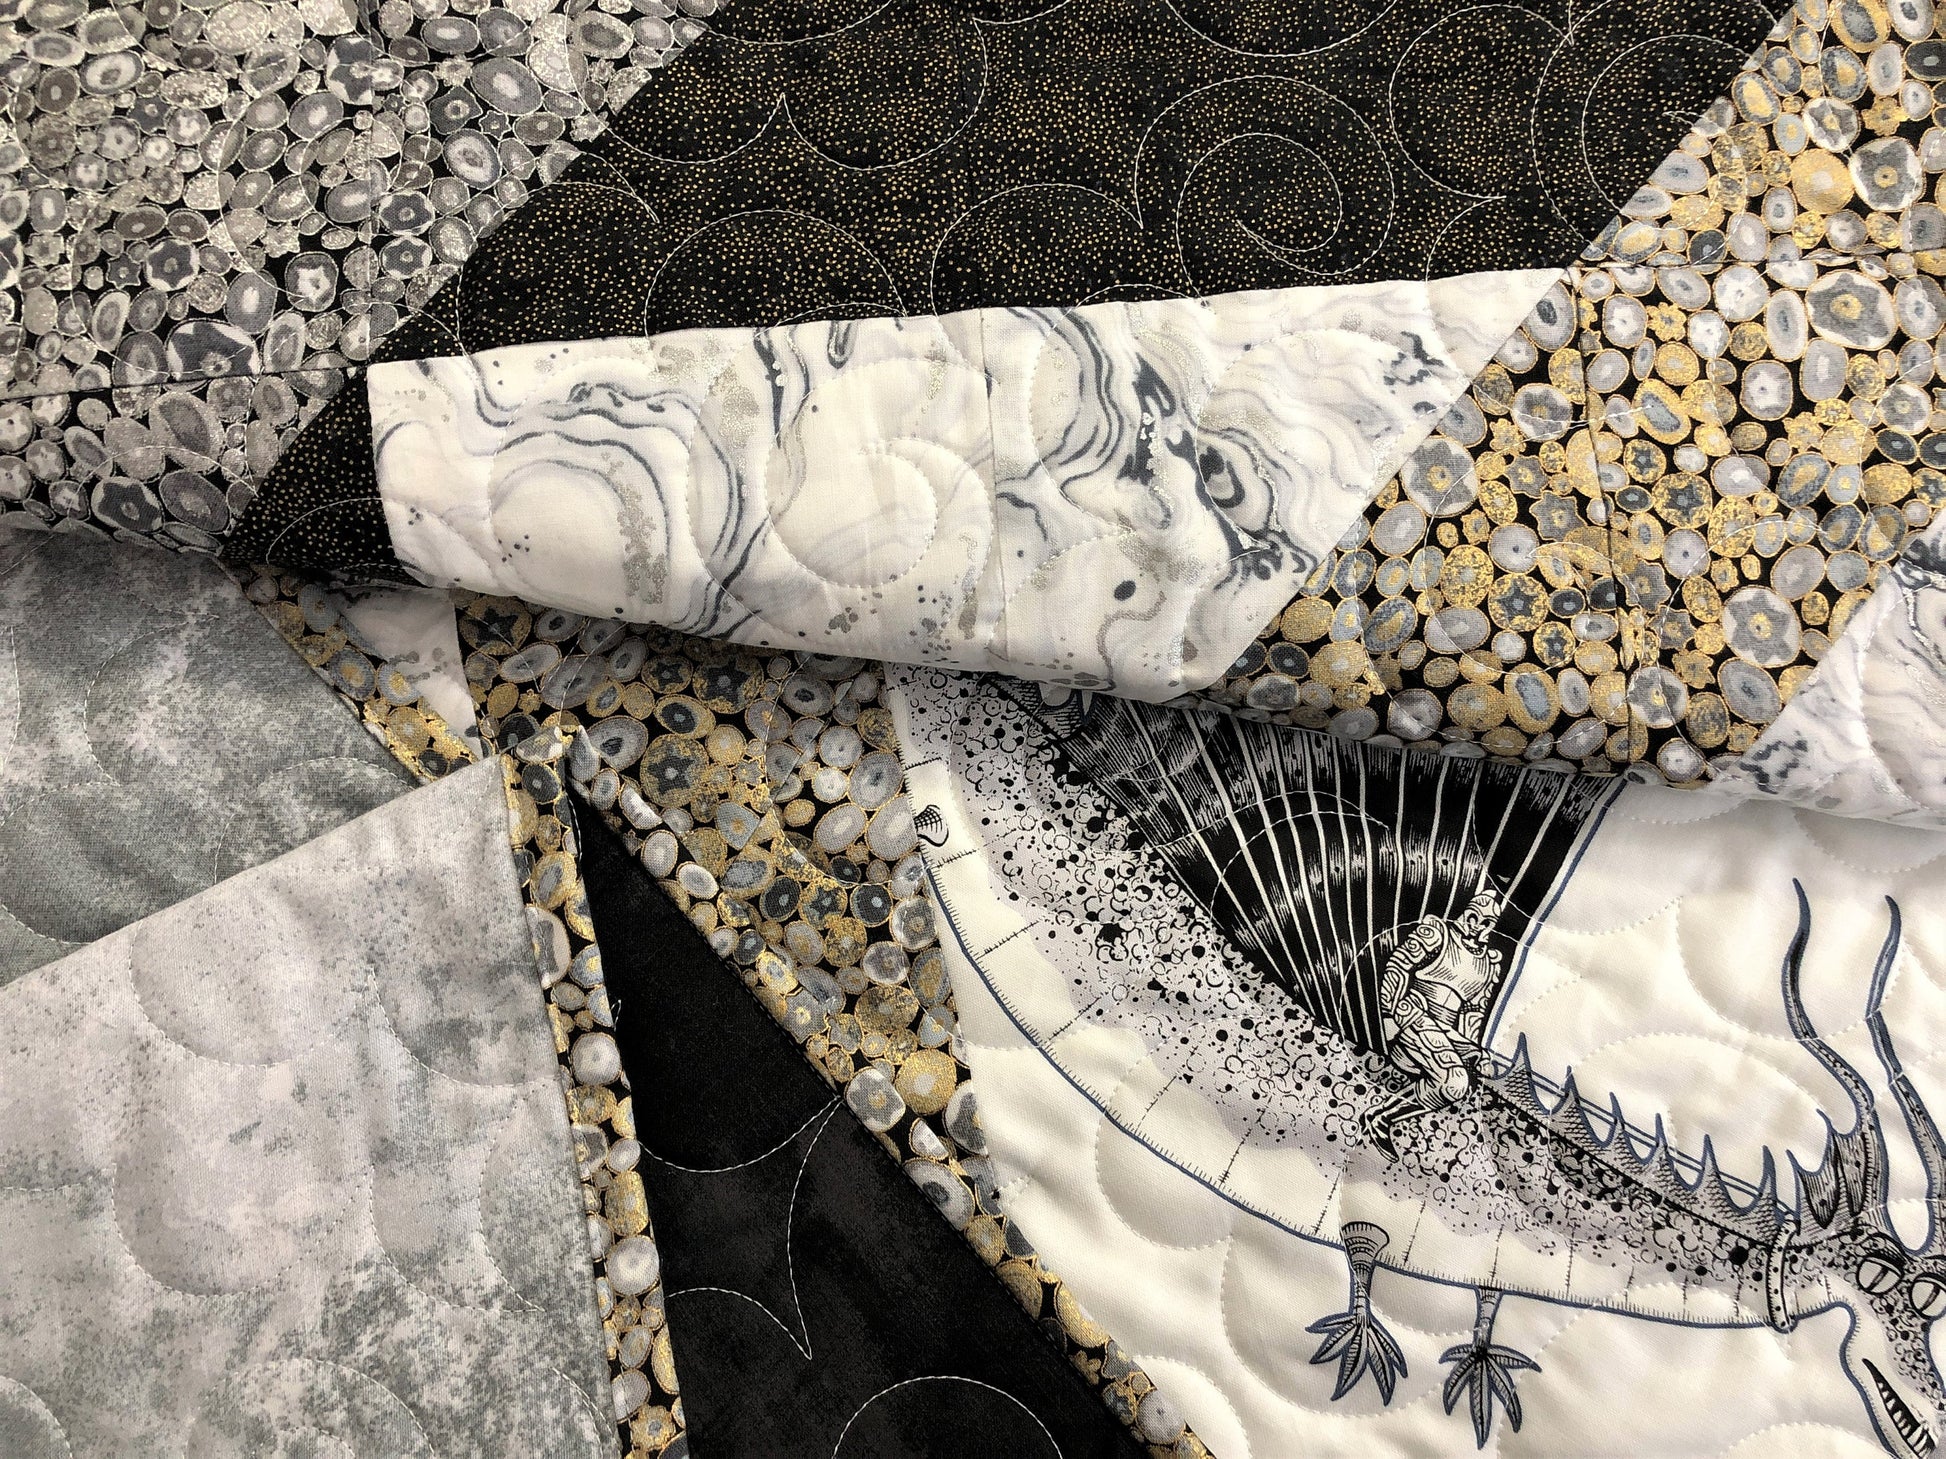 Dragons Quilt, White, Black, Metallic Gold and Silver, Queen Size